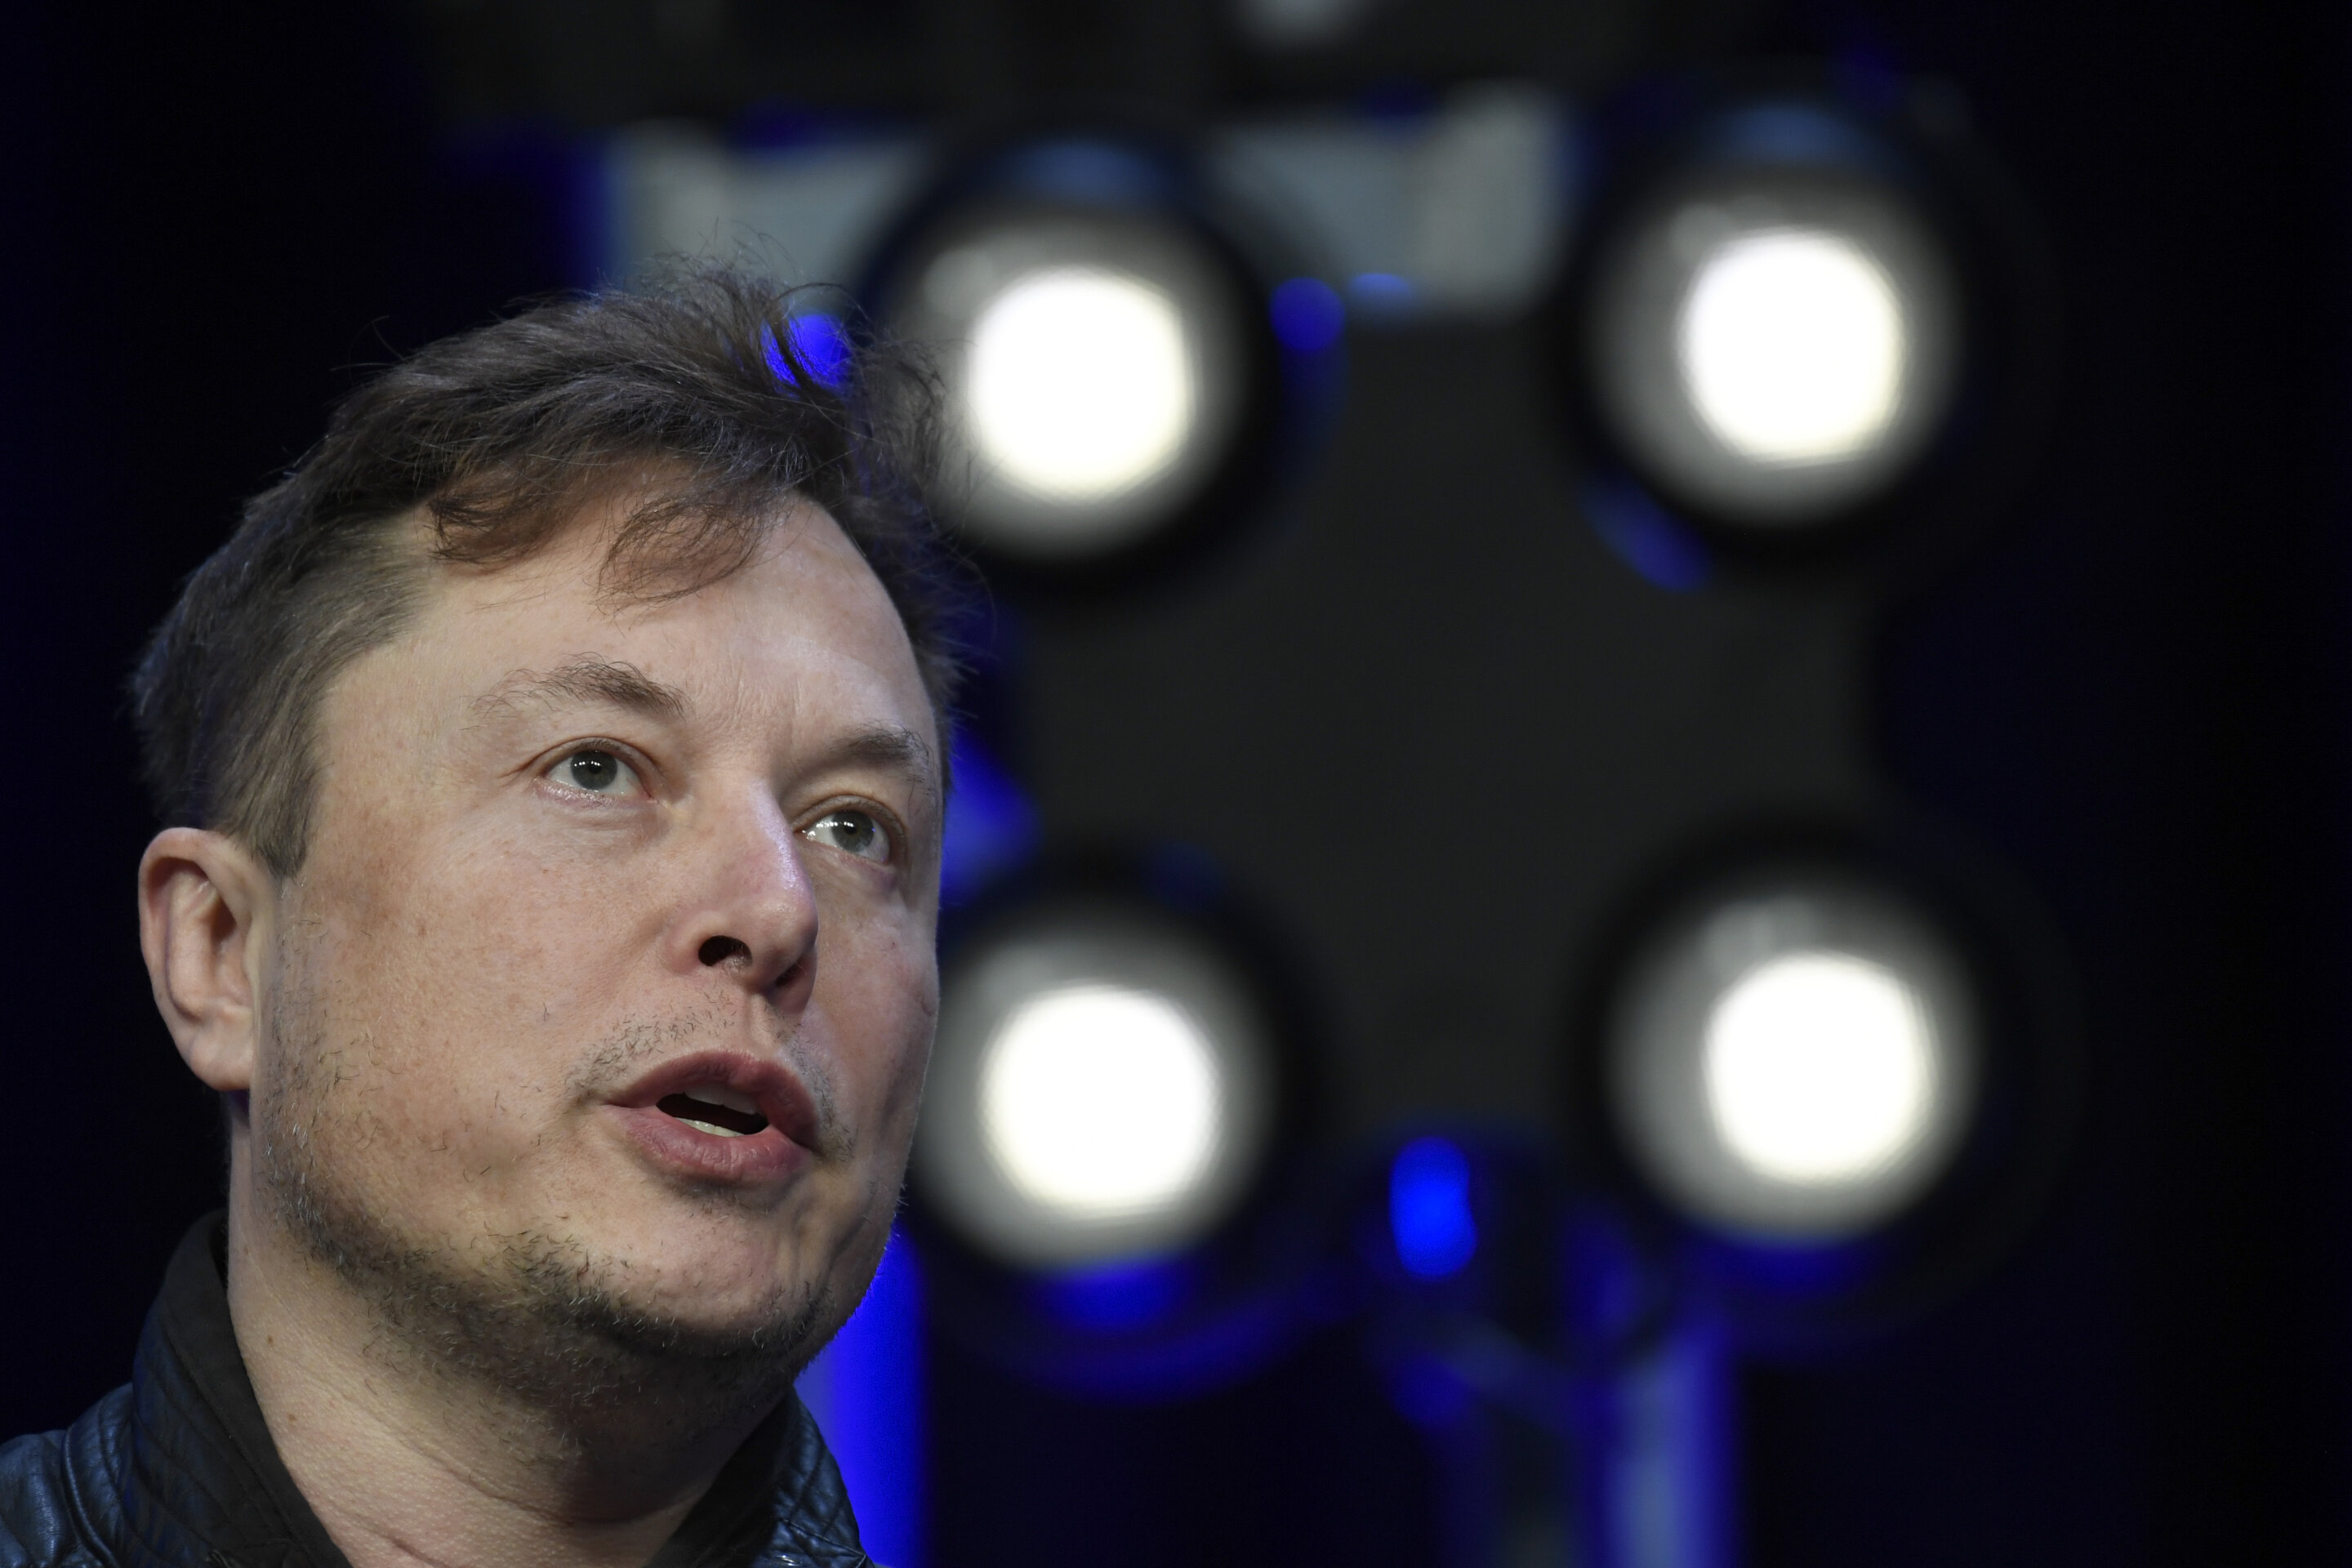 After Twitter poll, CEO Musk sells off B in Tesla shares